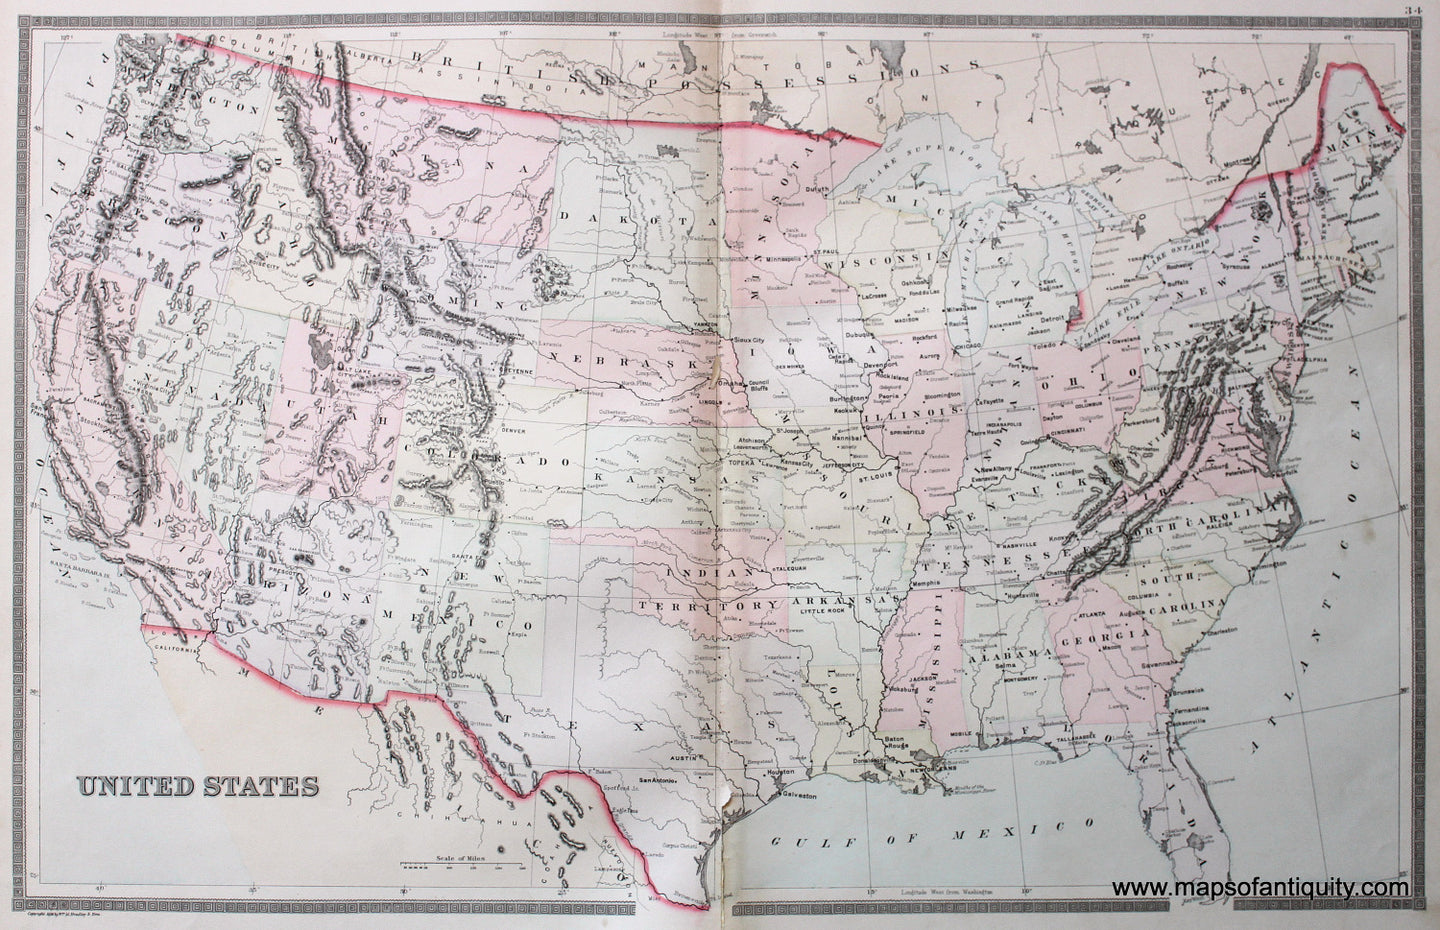 Antique-Hand-Colored-Map-United-States-United-States--1887-Bradley-Maps-Of-Antiquity